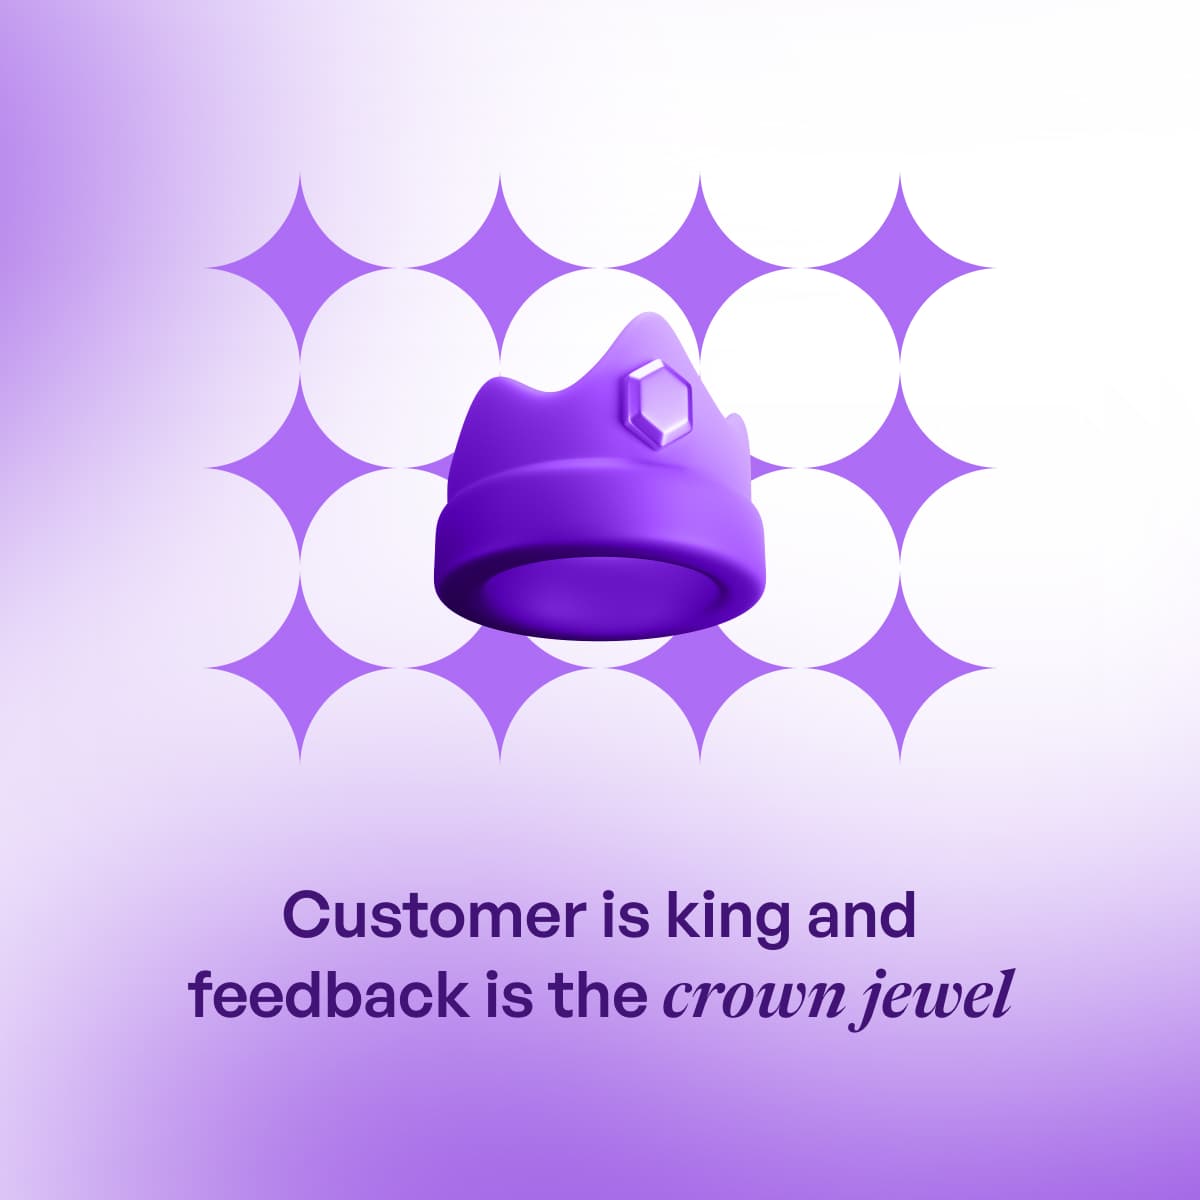 Customer is king and feedback is the crown jewel